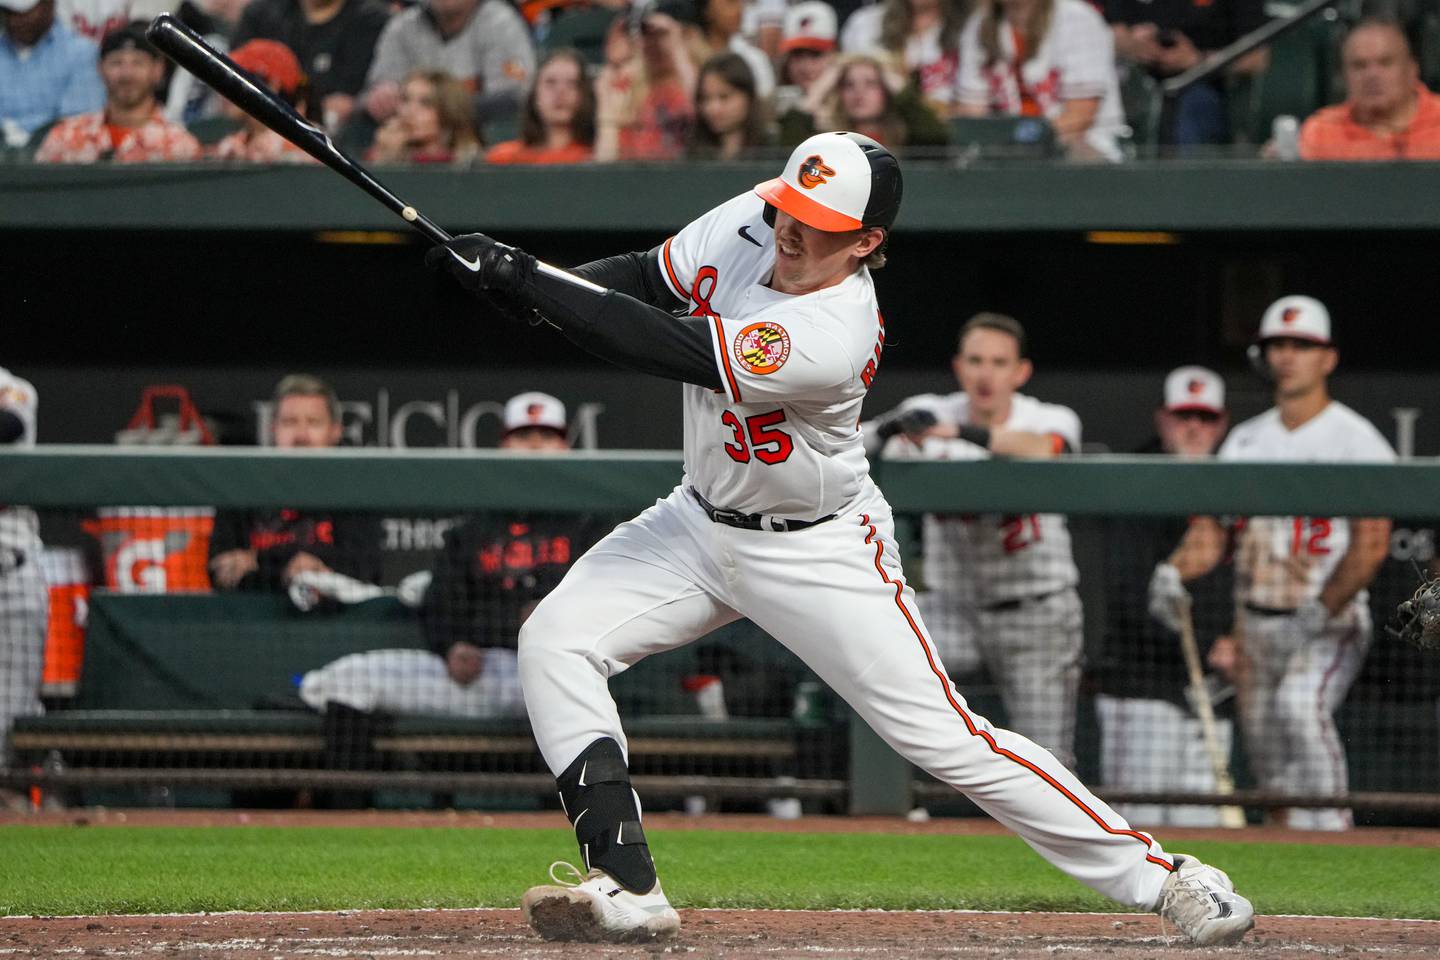 Baltimore Orioles catcher Adley Rutschman (35) singles in a baseball game against the Tampa Bay Rays at Camden Yards on Wednesday, May 10. The Orioles beat the Rays, 2-1, to win the 3-game series.